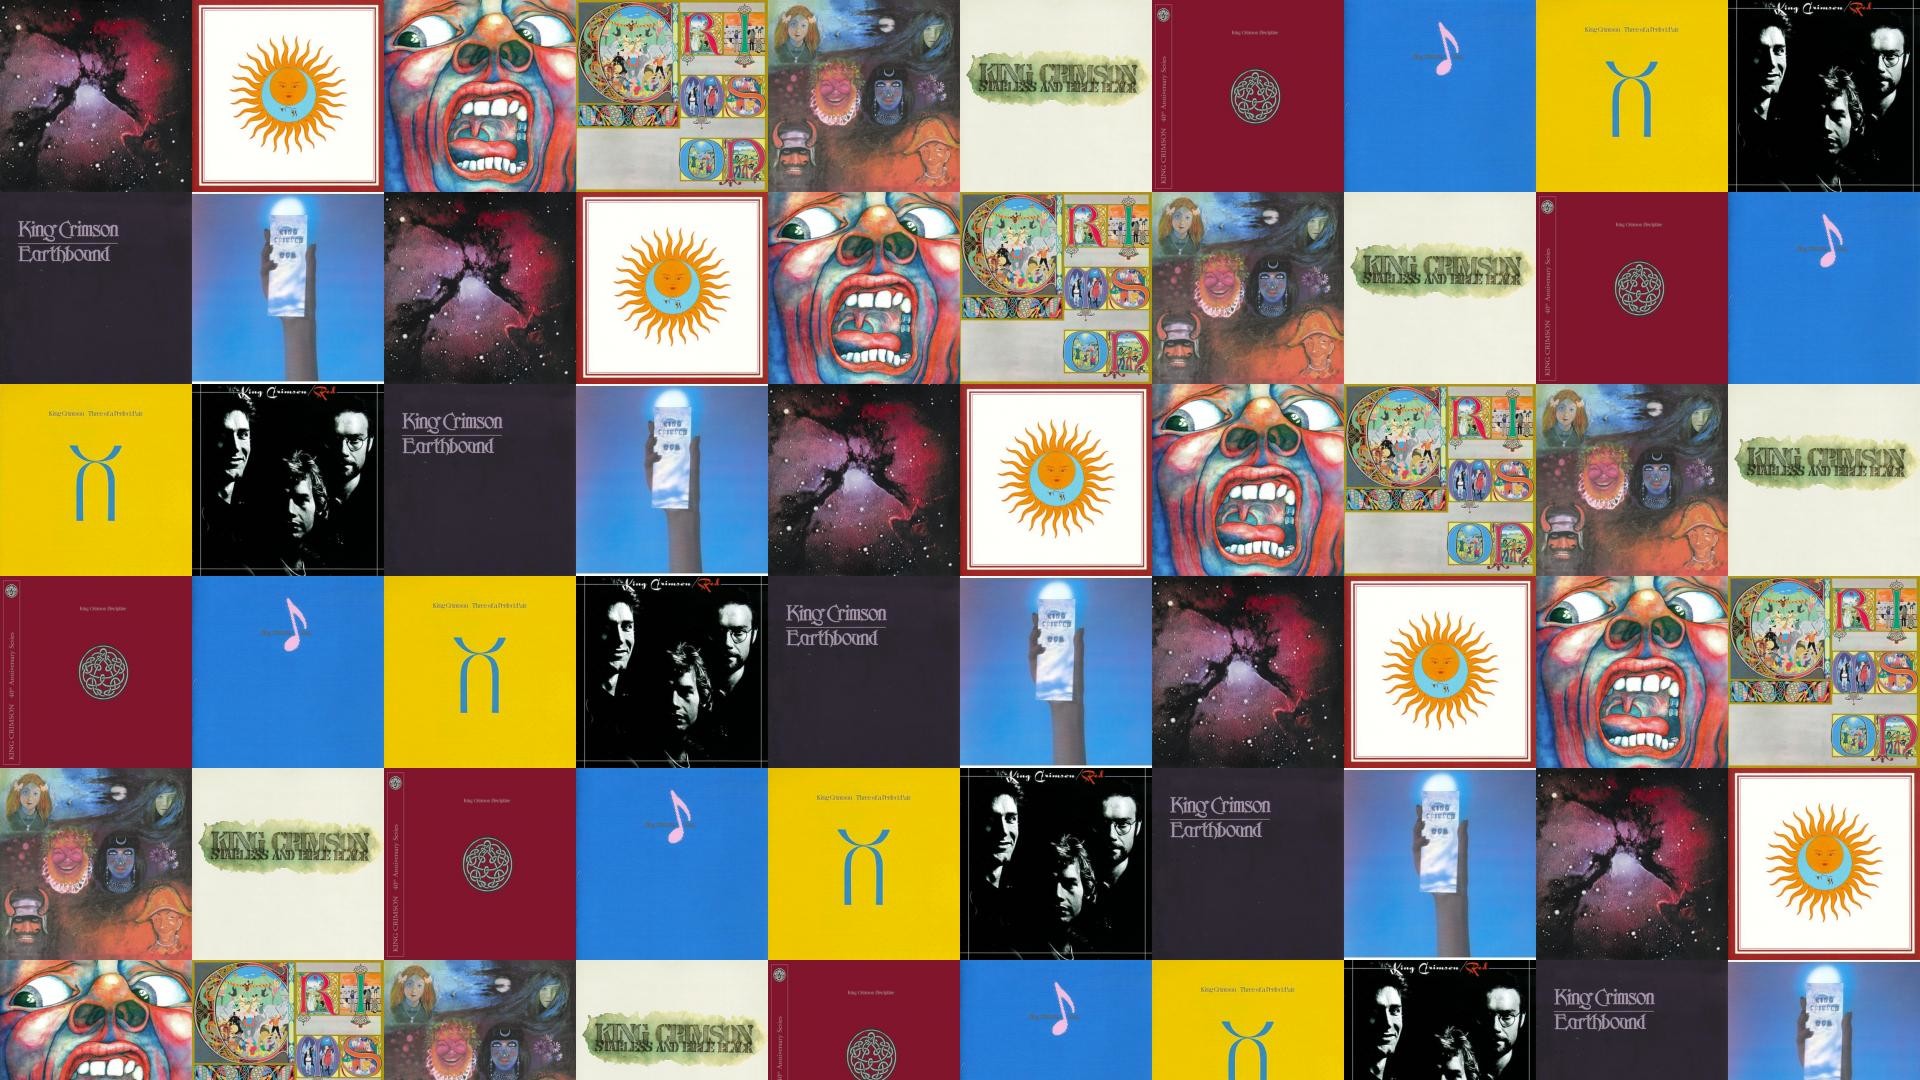 1920x1080 Download this free wallpaper with images of King Crimson – Islands, King  Crimson – Larks Tongues In Aspic, King Crimson – In The Court Of The Crimson  King, ...